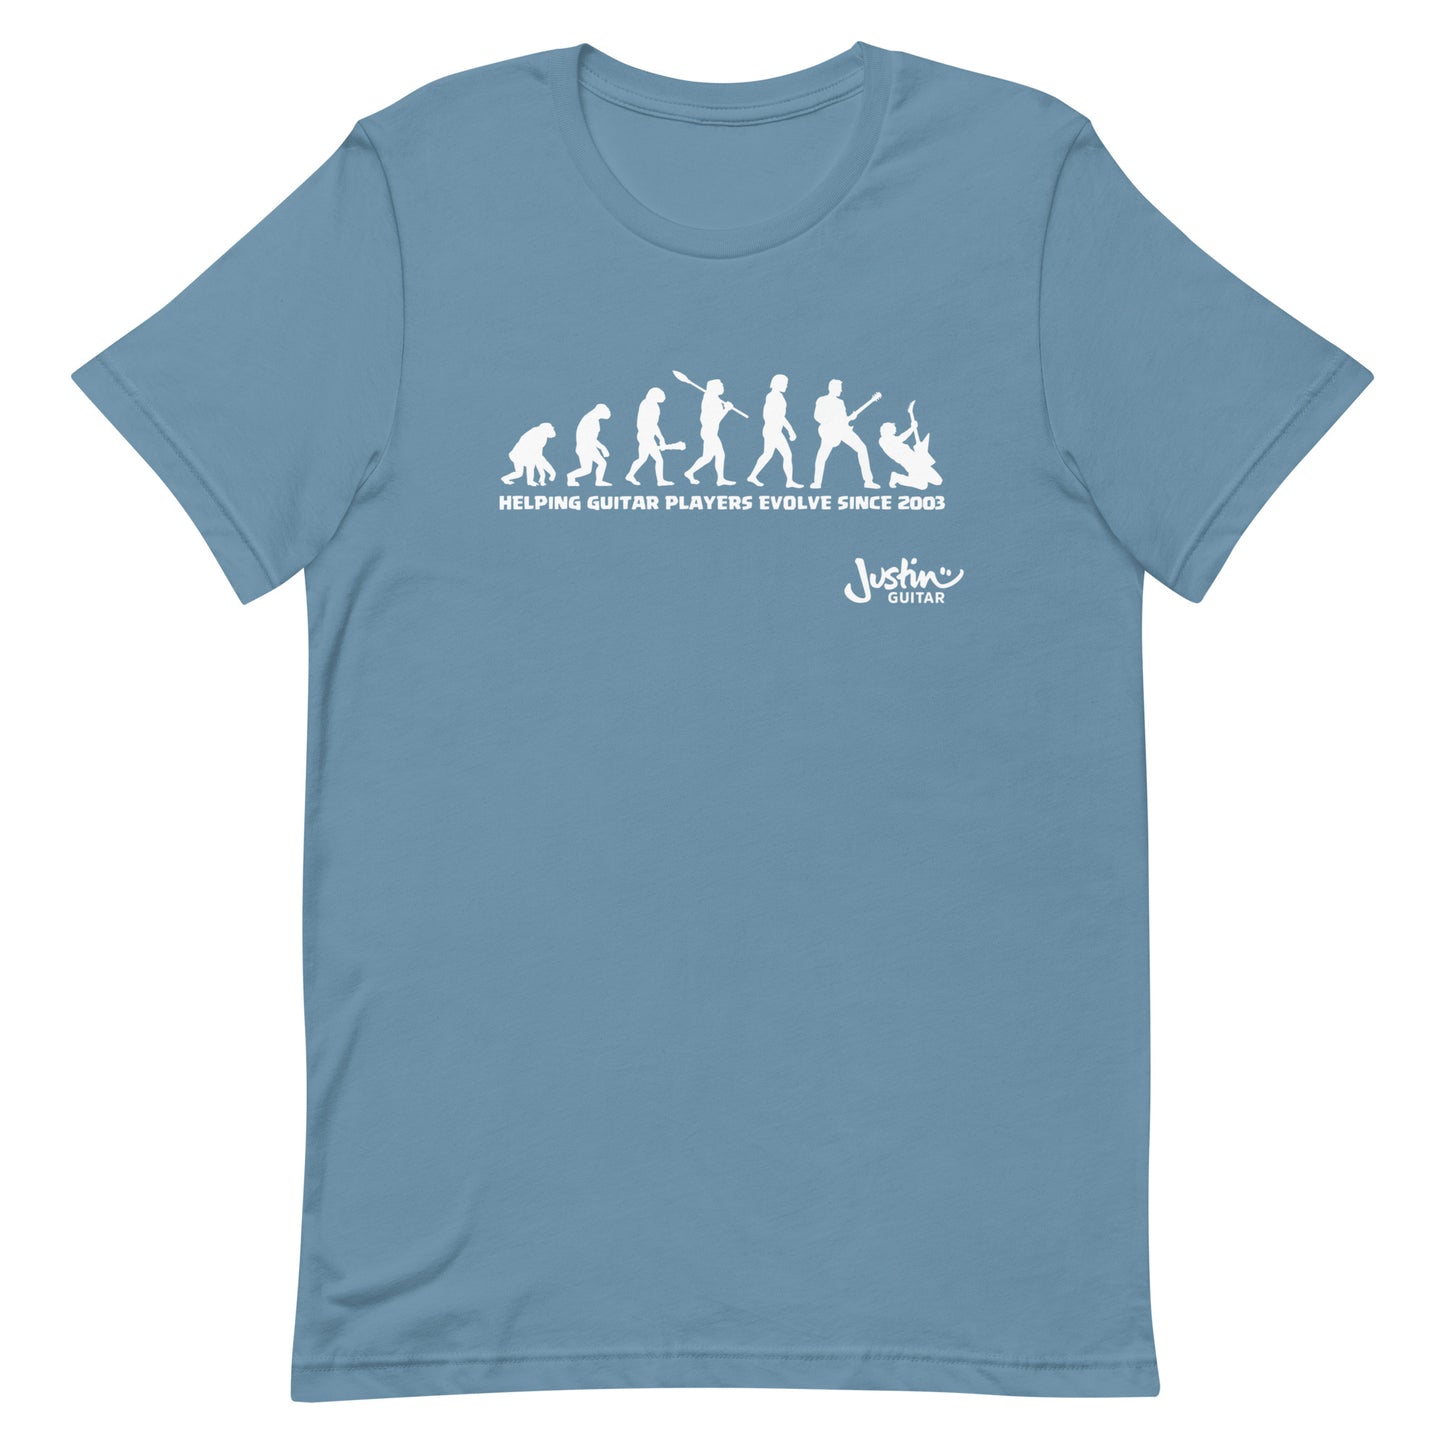 Steel blue Tshirt with funny design of evolving guitar players through time. 